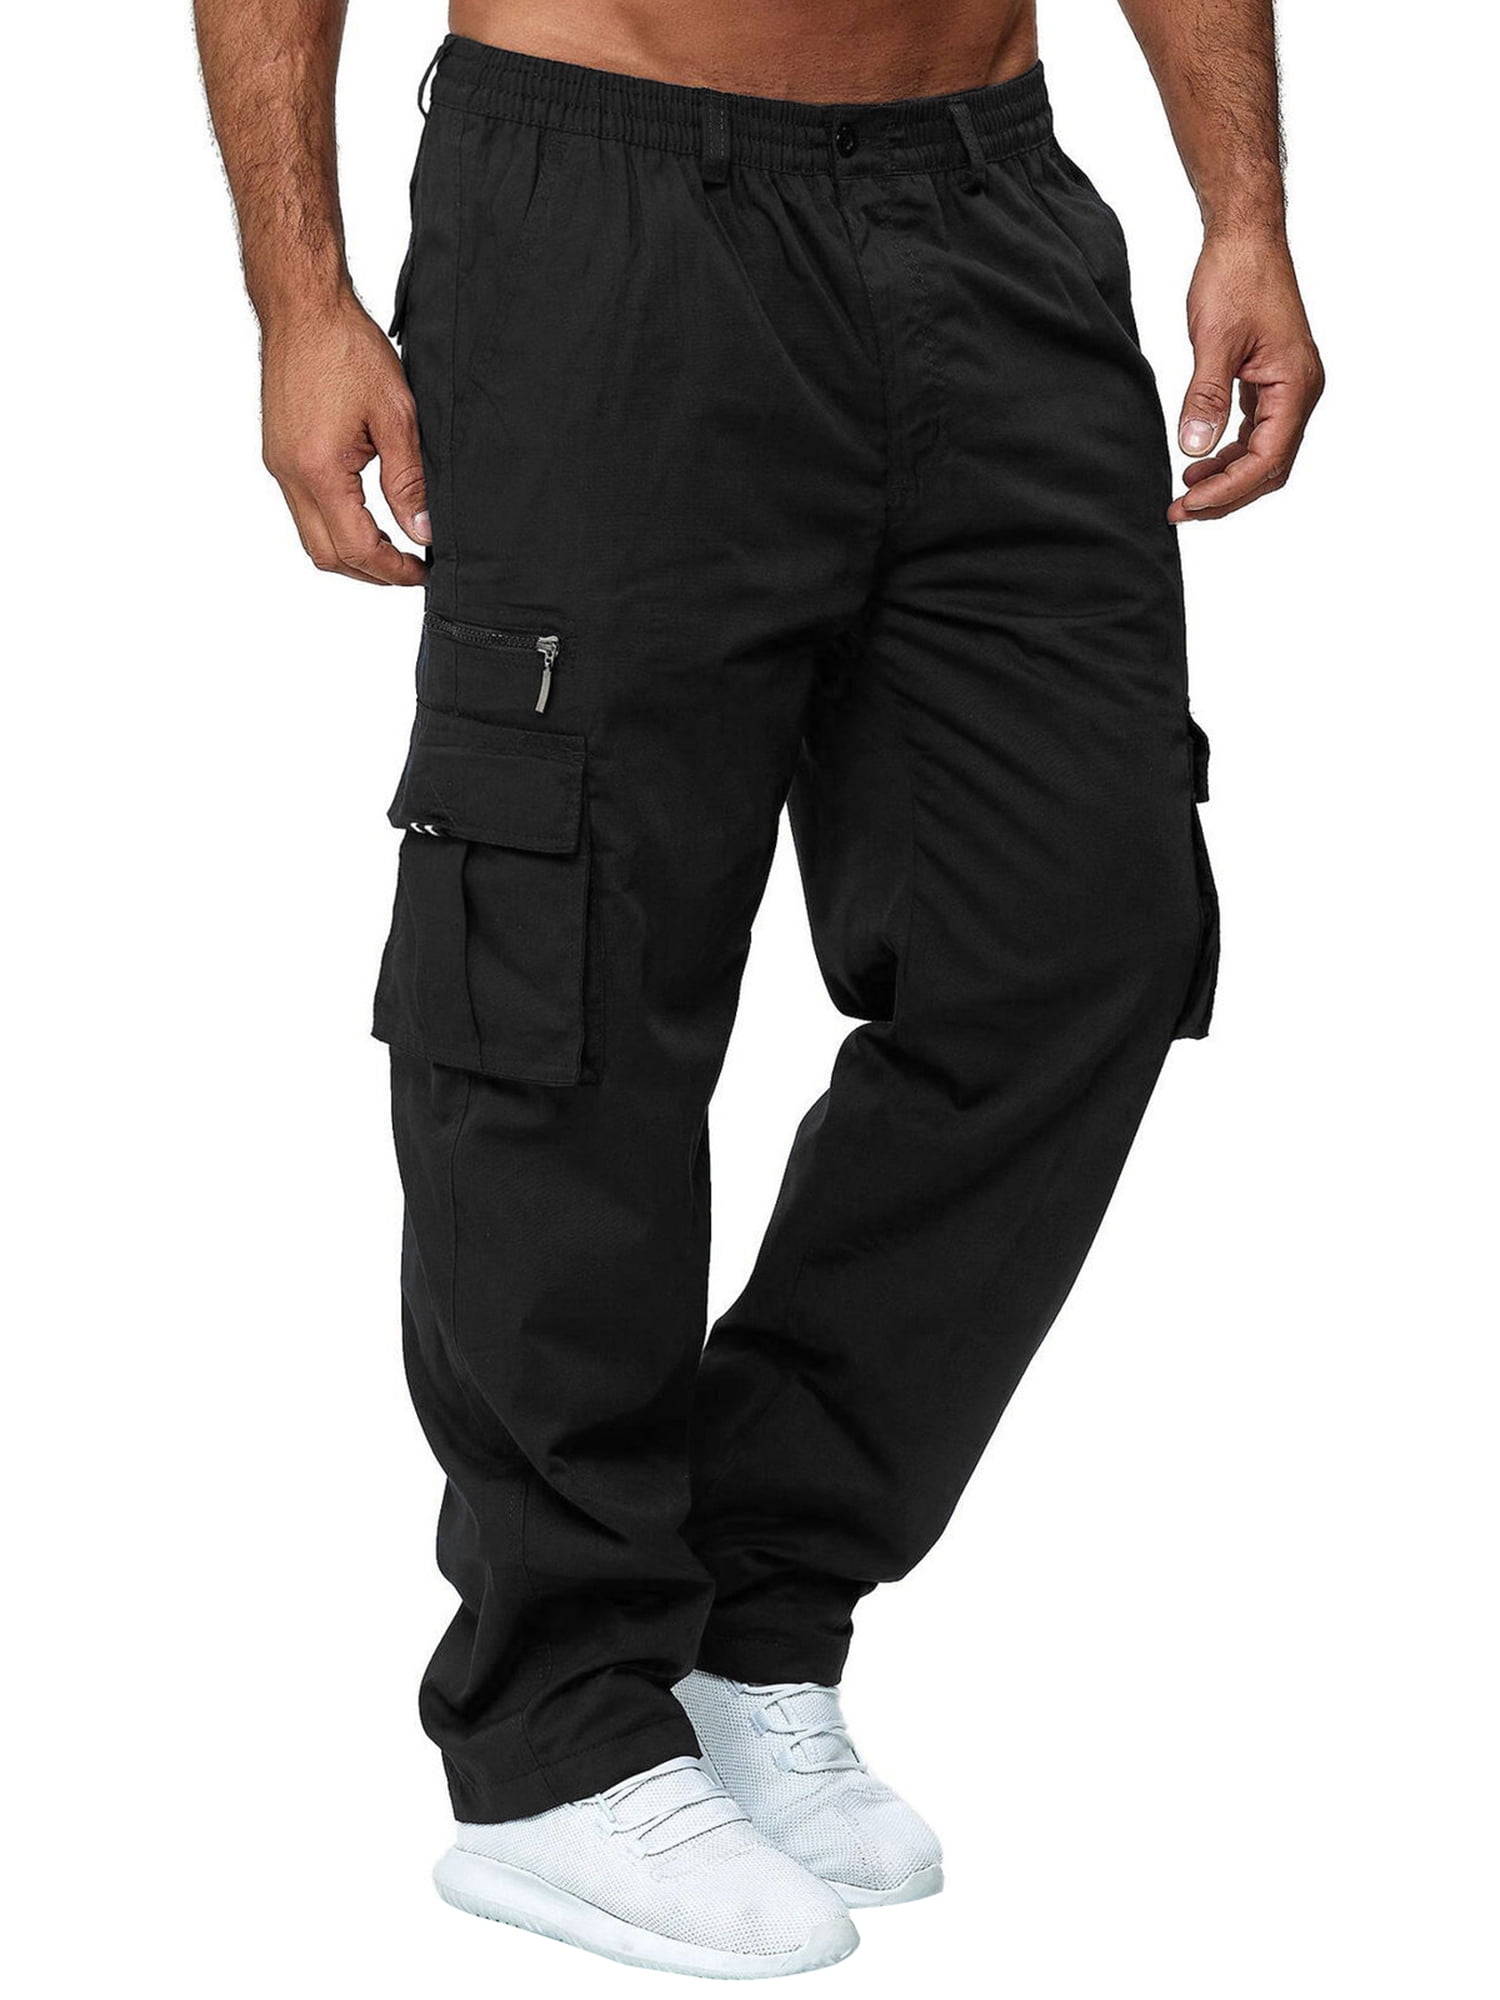 wybzd Men Casual Loose Straight Cargo Pants Elastic Waist Relaxed Fit  Straight Leg Trousers with Pockets Black XL